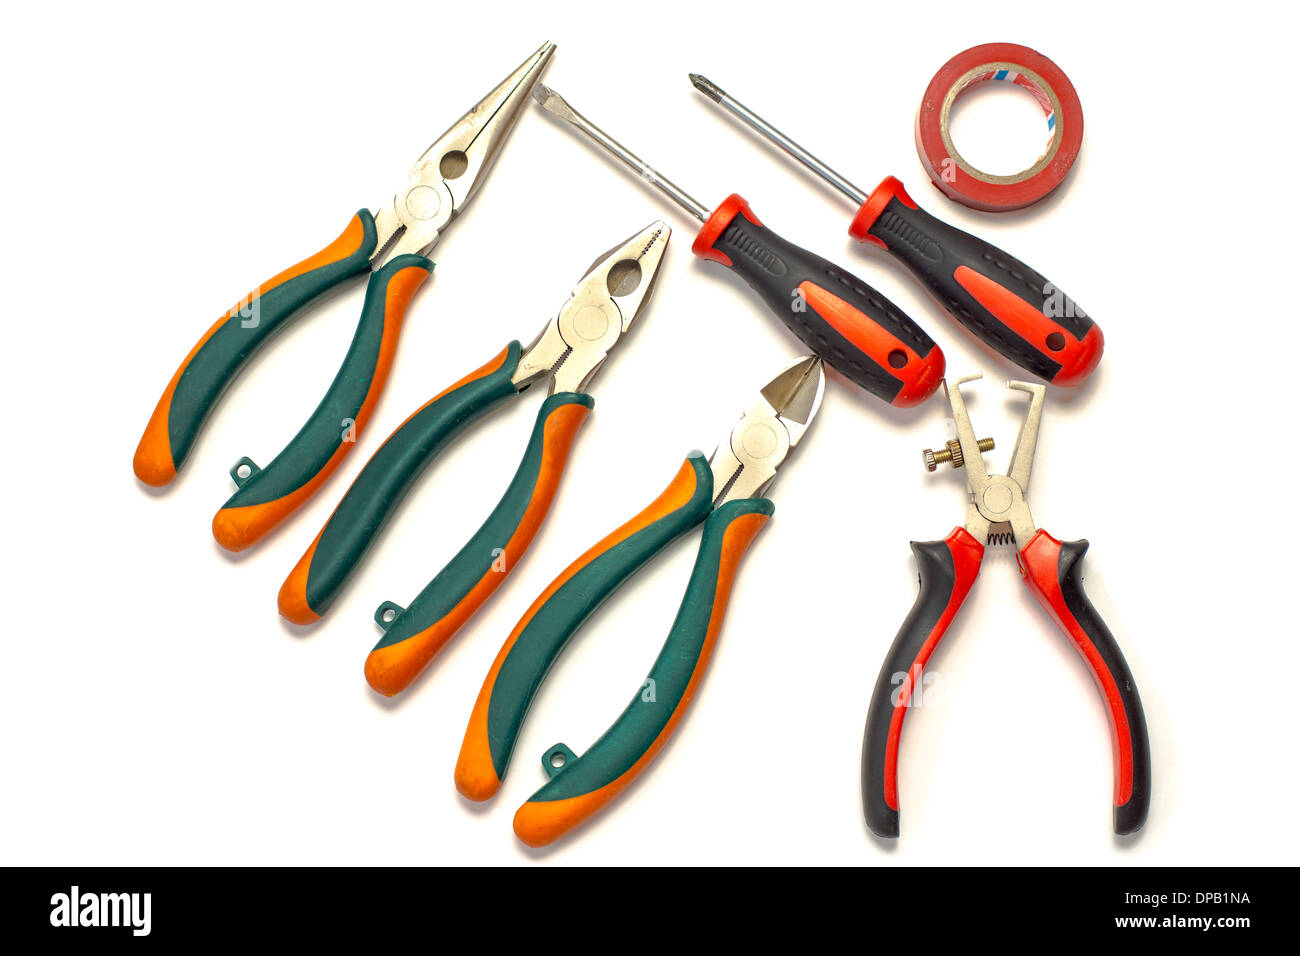 Electrician used tools on white background Stock Photo